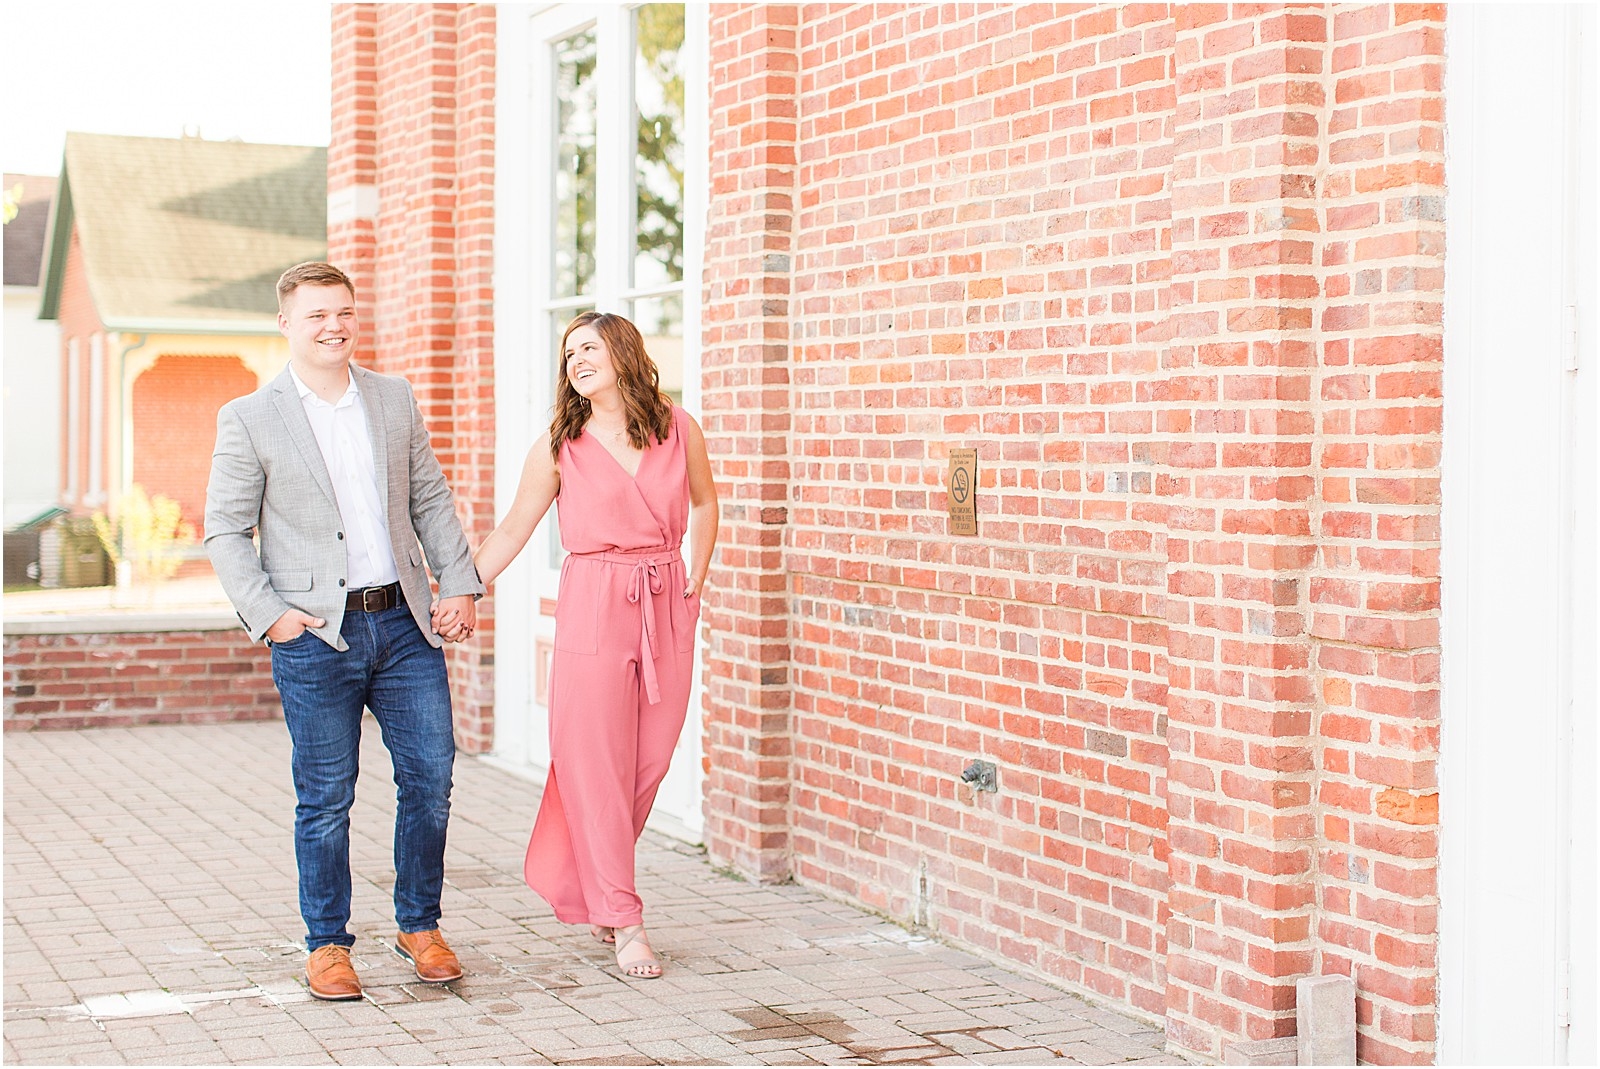 Downtown Huntingburgh Engagement Session | Gabby and Aidan | Bret and Brtandie Photography 006.jpg